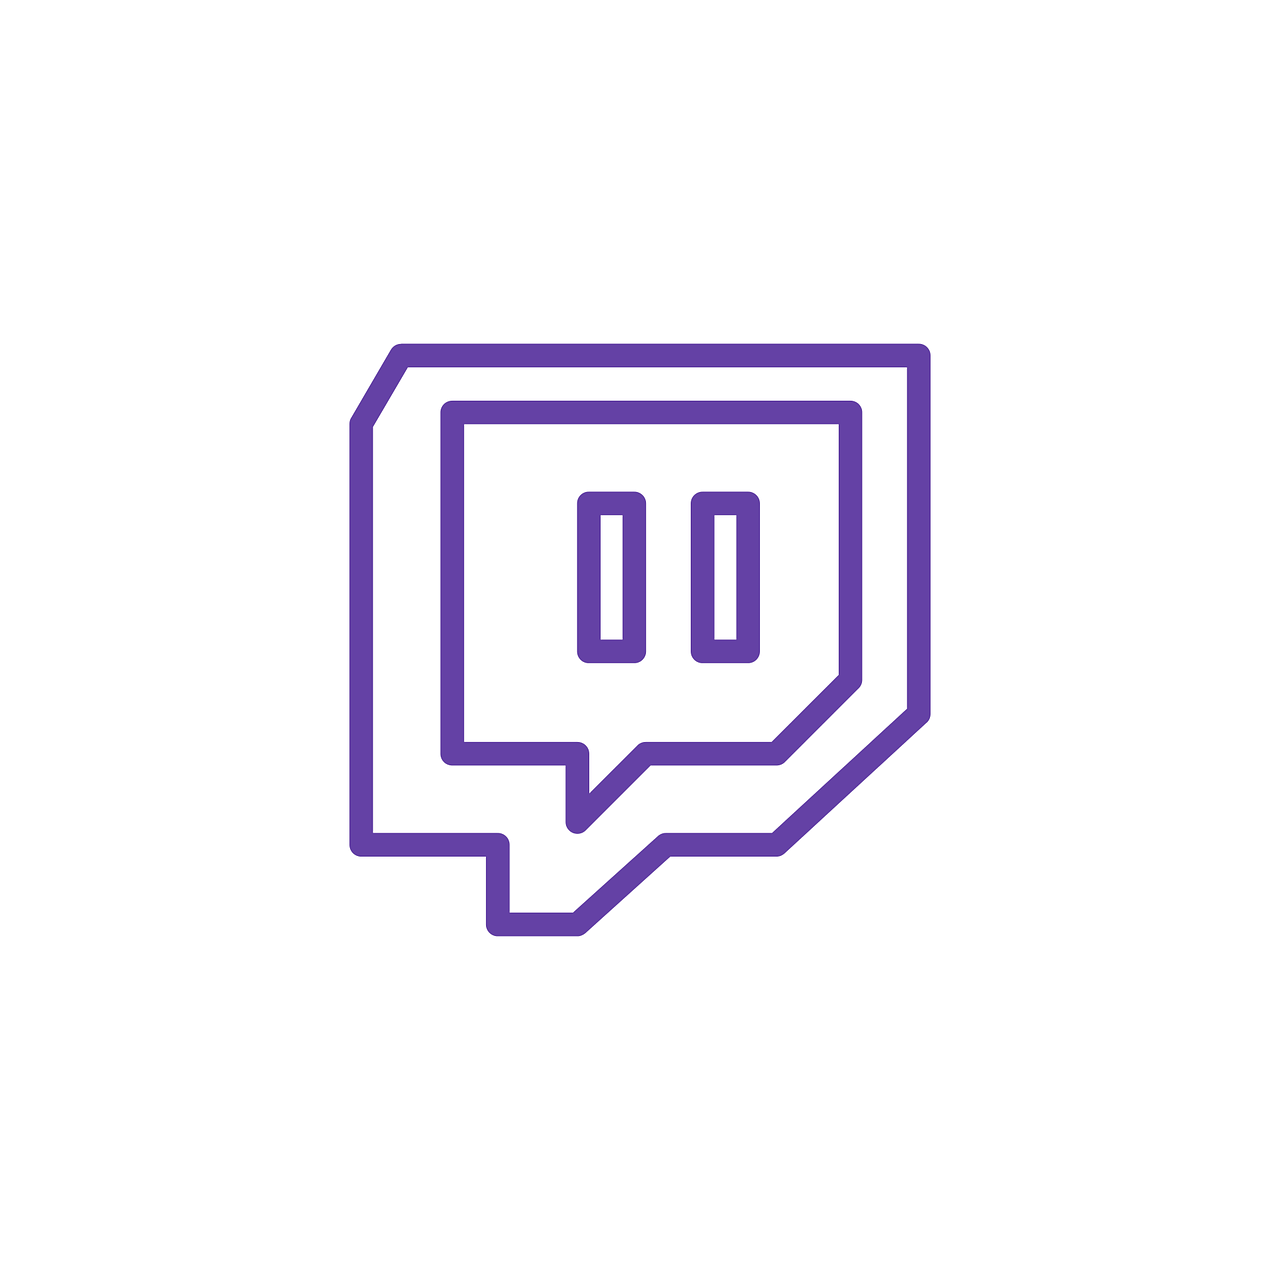 Untwitch: Reviews, Features, Pricing & Download